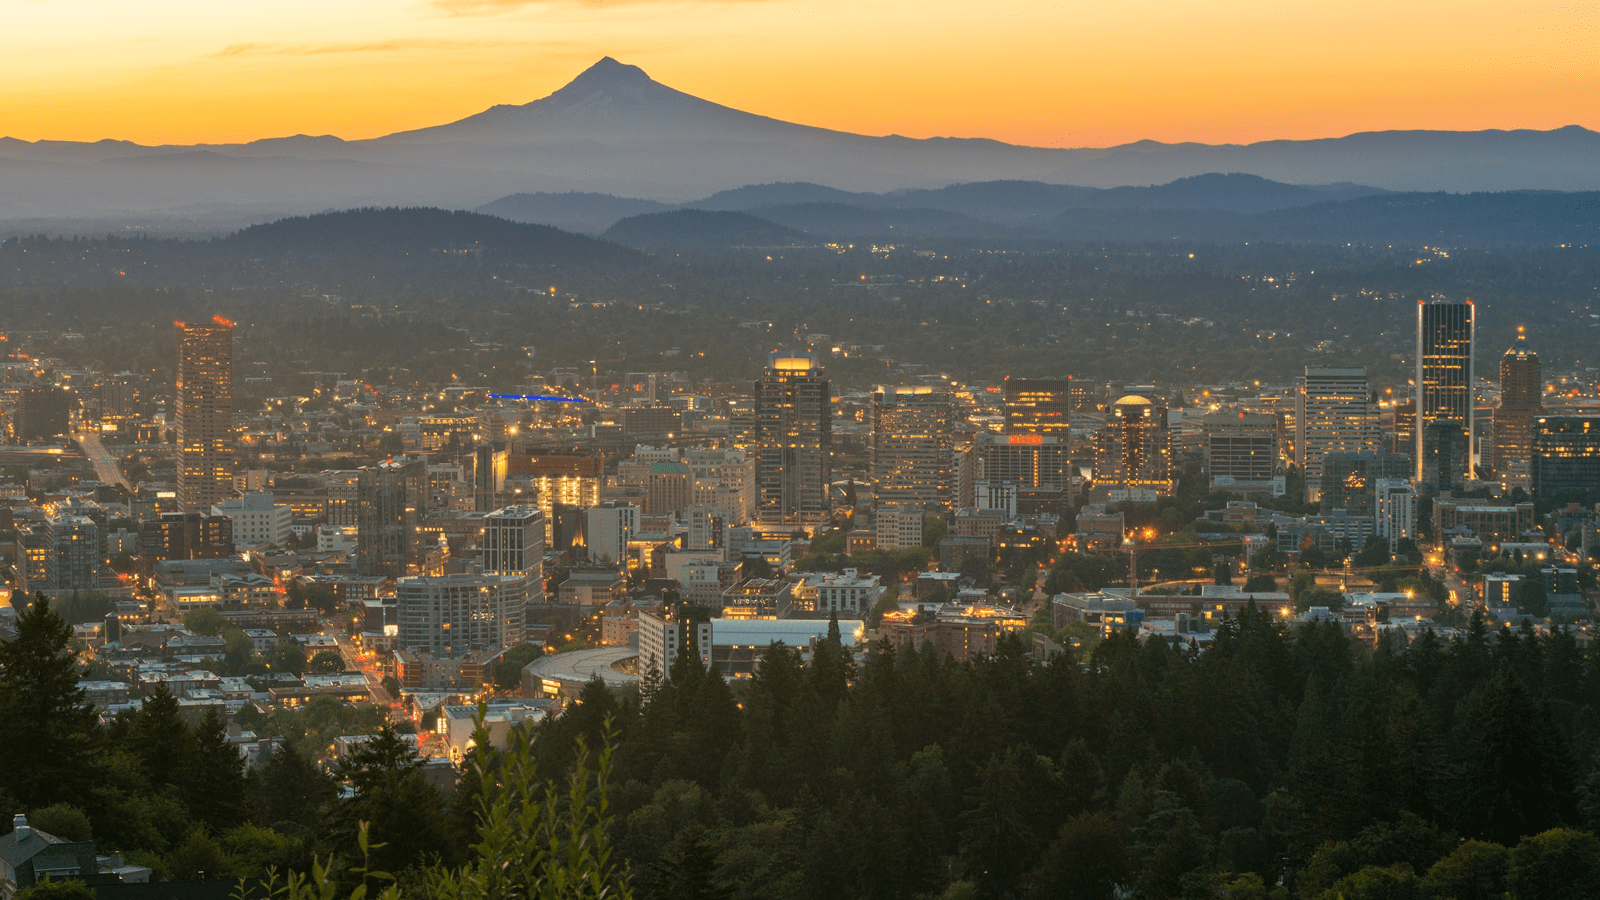 An image of a city with a mountain and sunset in the background.